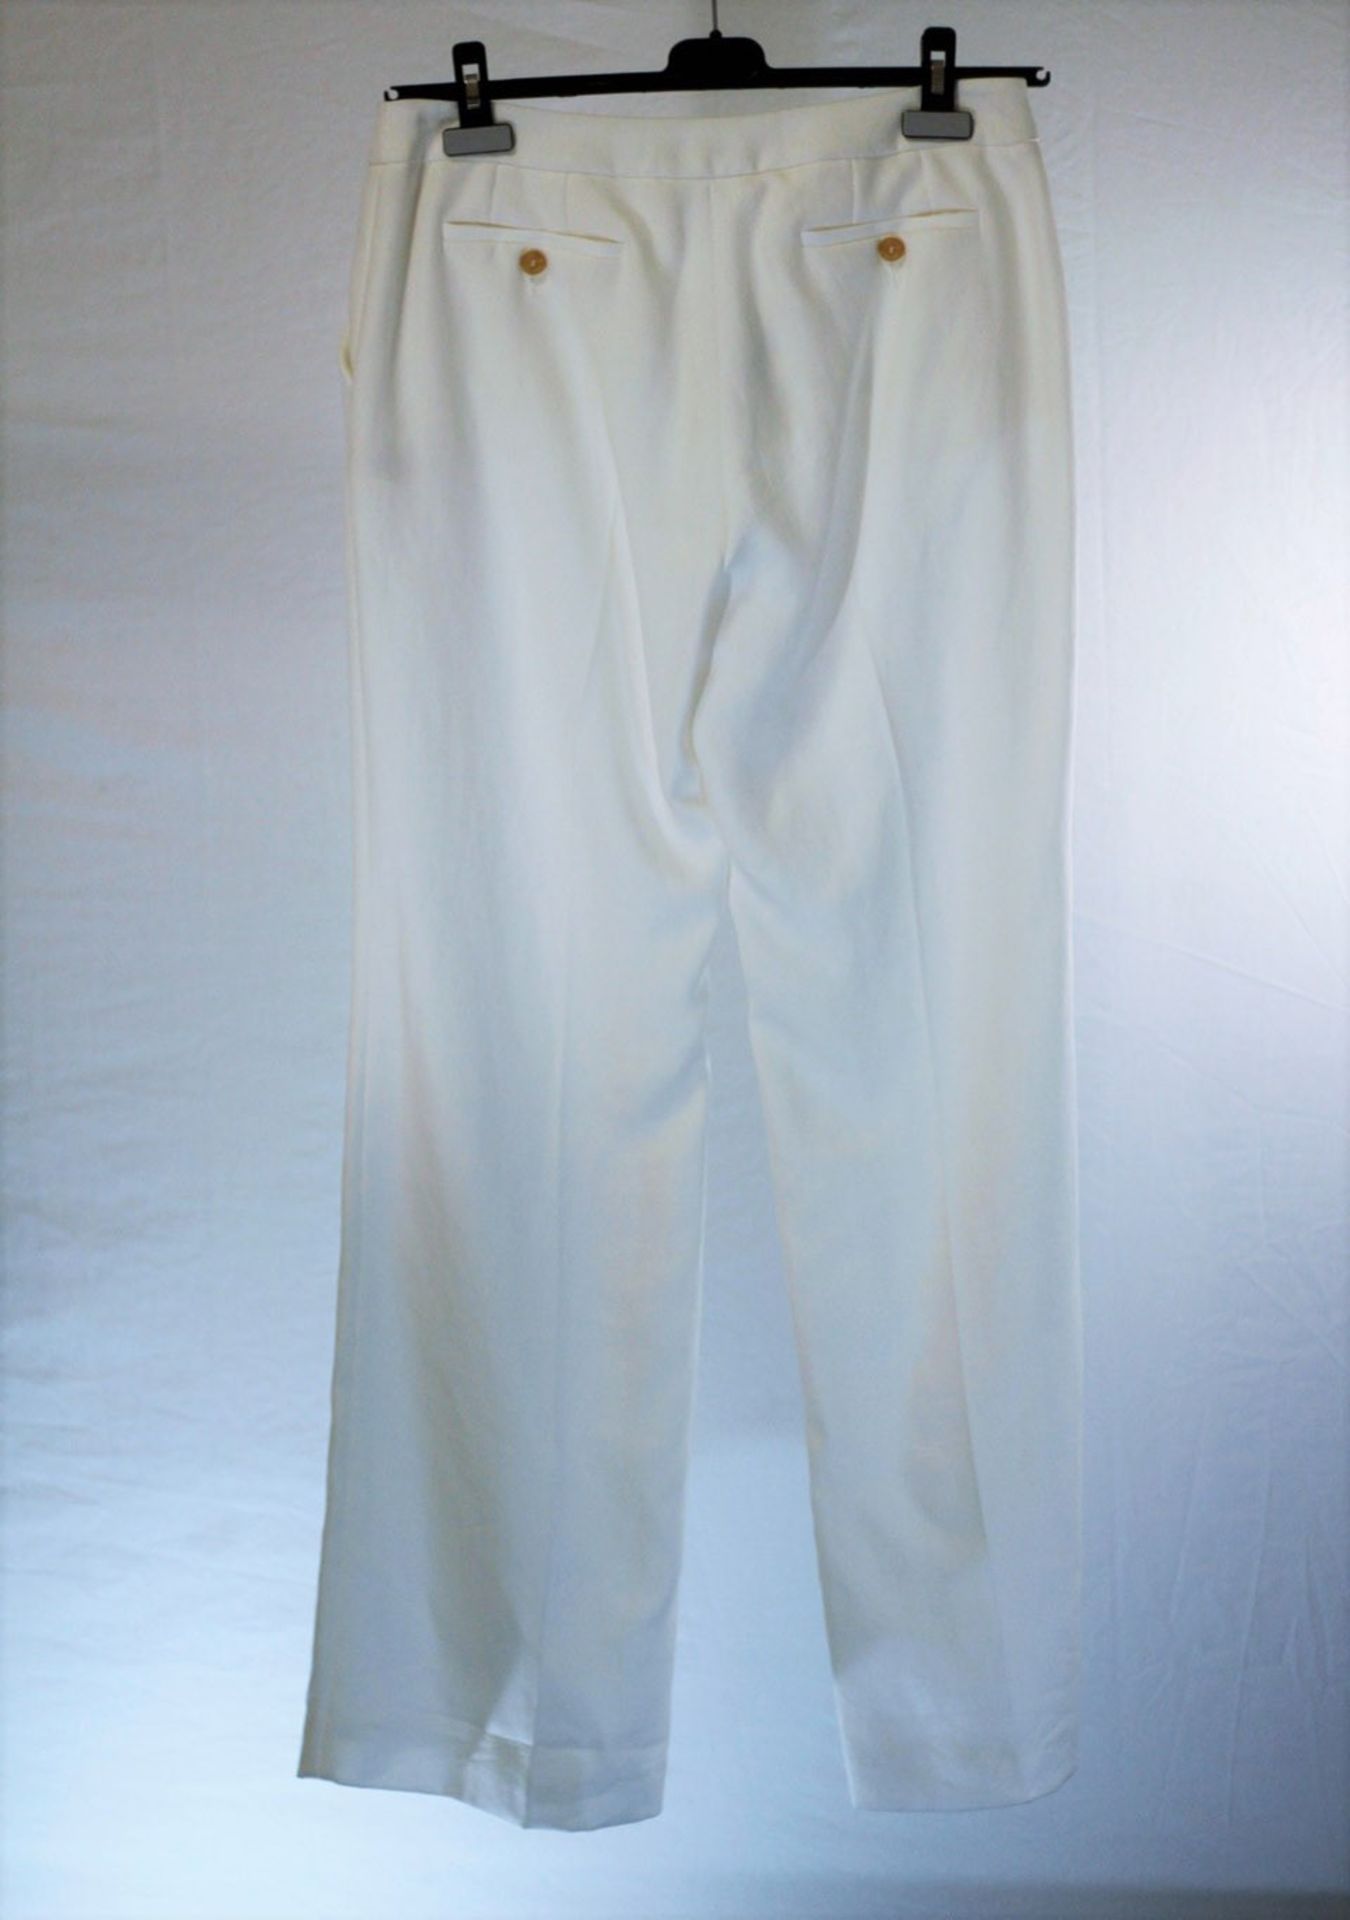 1 x Agnona White Trousers - Size: 16 - Material: 100% Ramie. Lining 52% Viscose, 48% Cotton - From a - Image 7 of 7